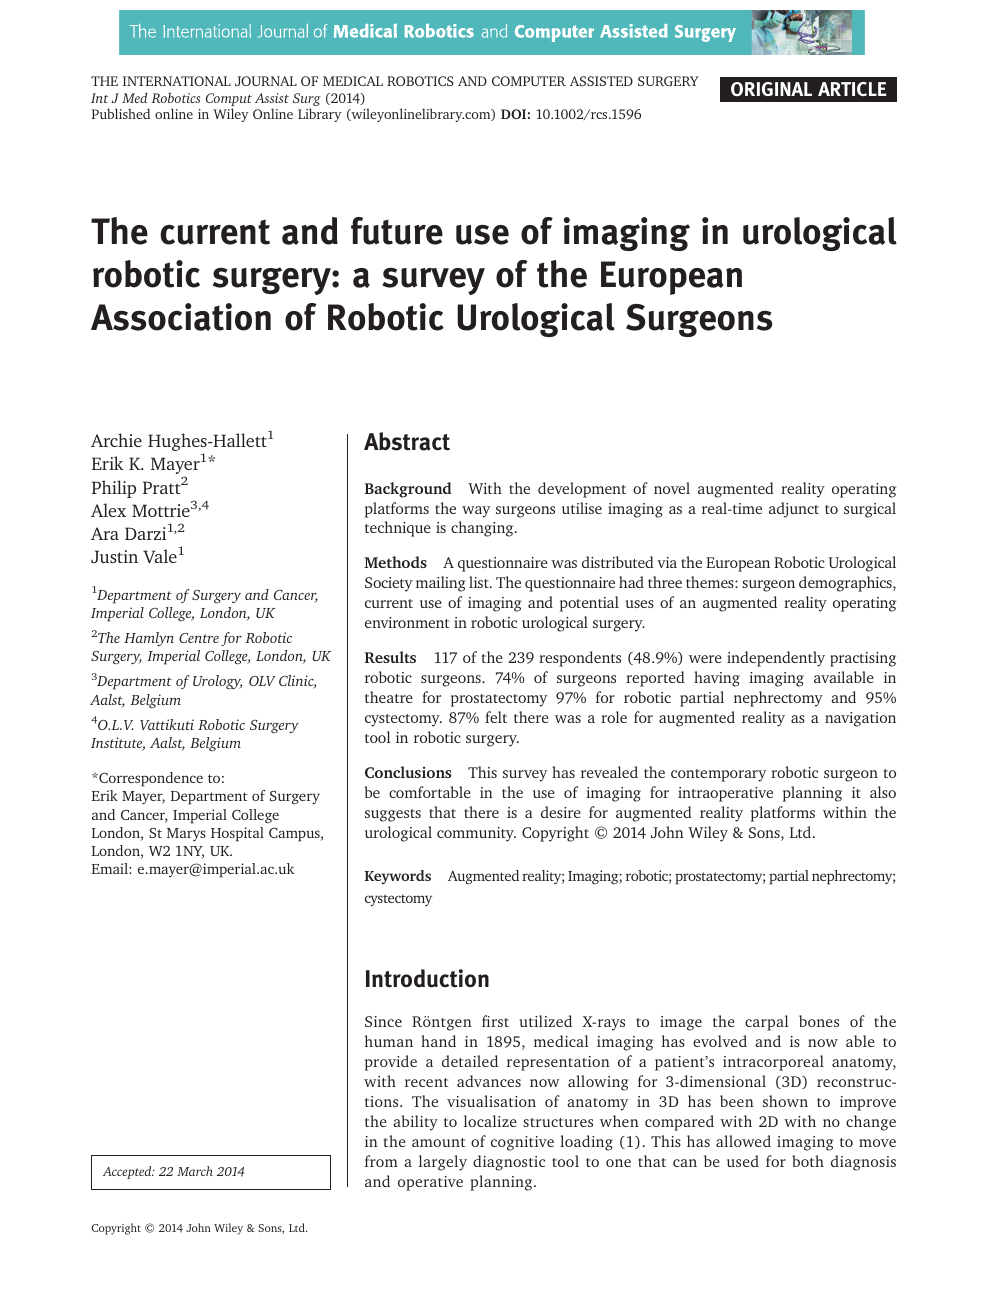 research paper on robotic surgery